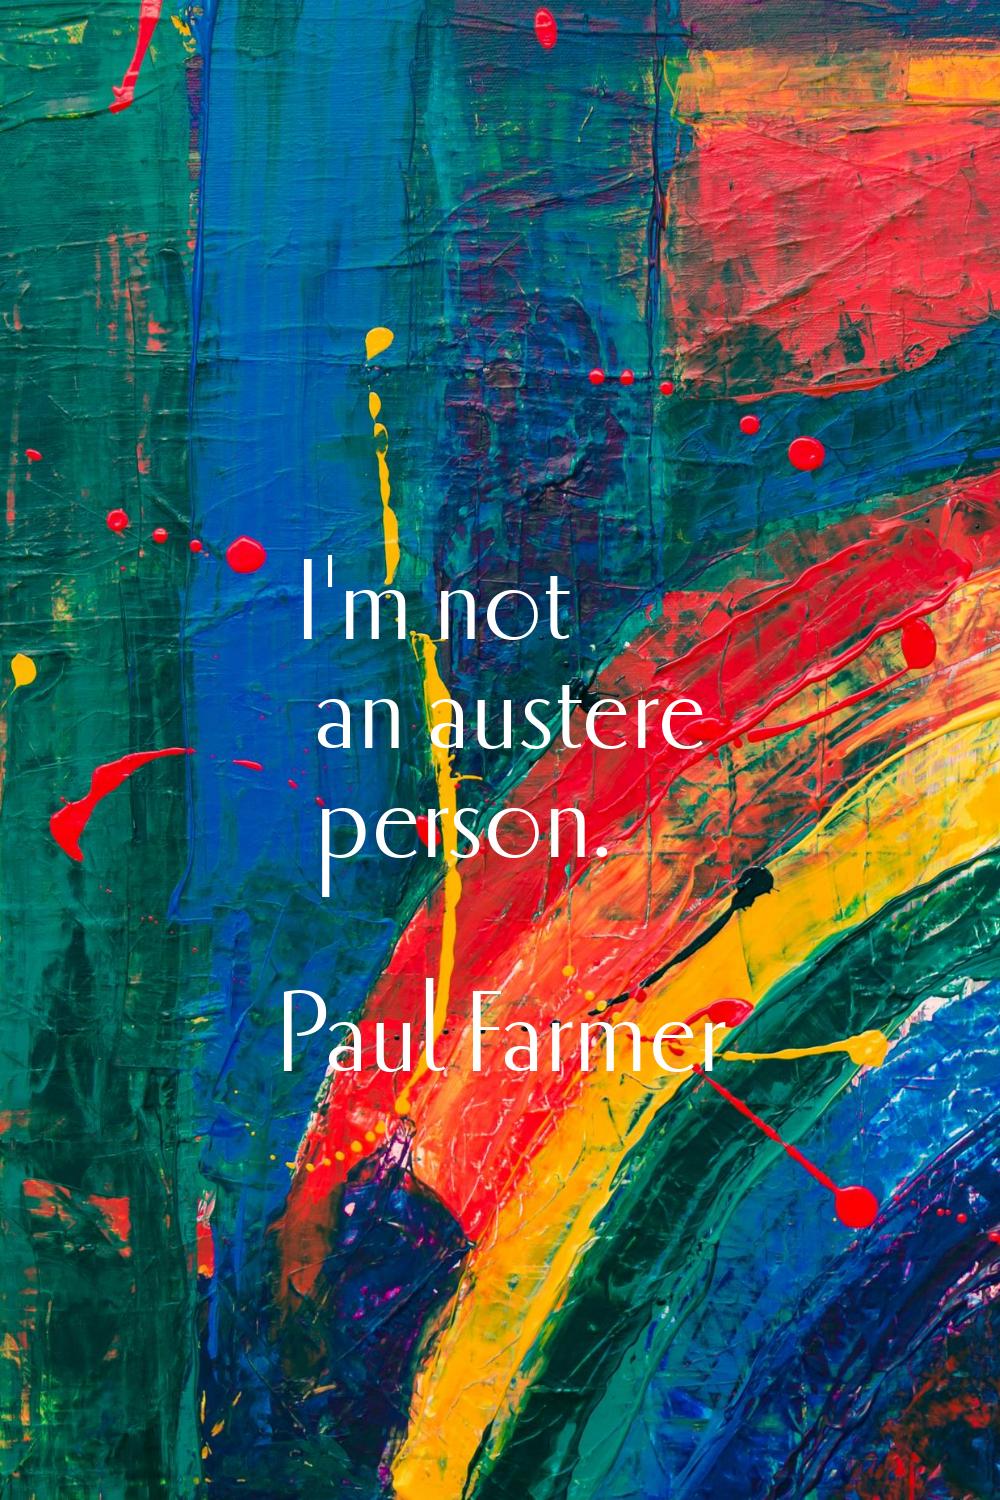 I'm not an austere person.